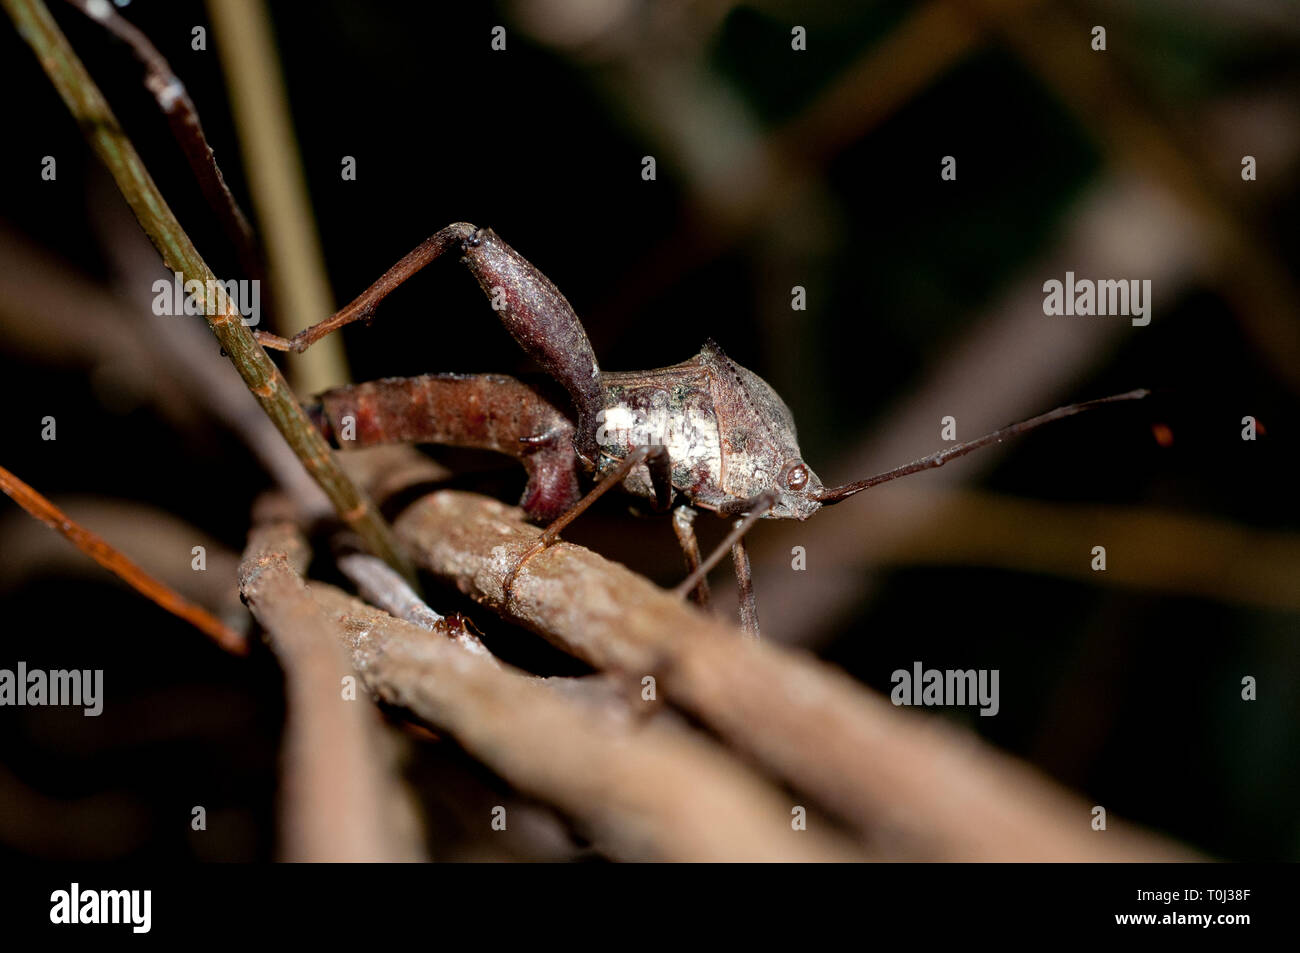 Leaf-footed Bug, Coreidae family, Klungkung, Bali, Indonesia Stock Photo